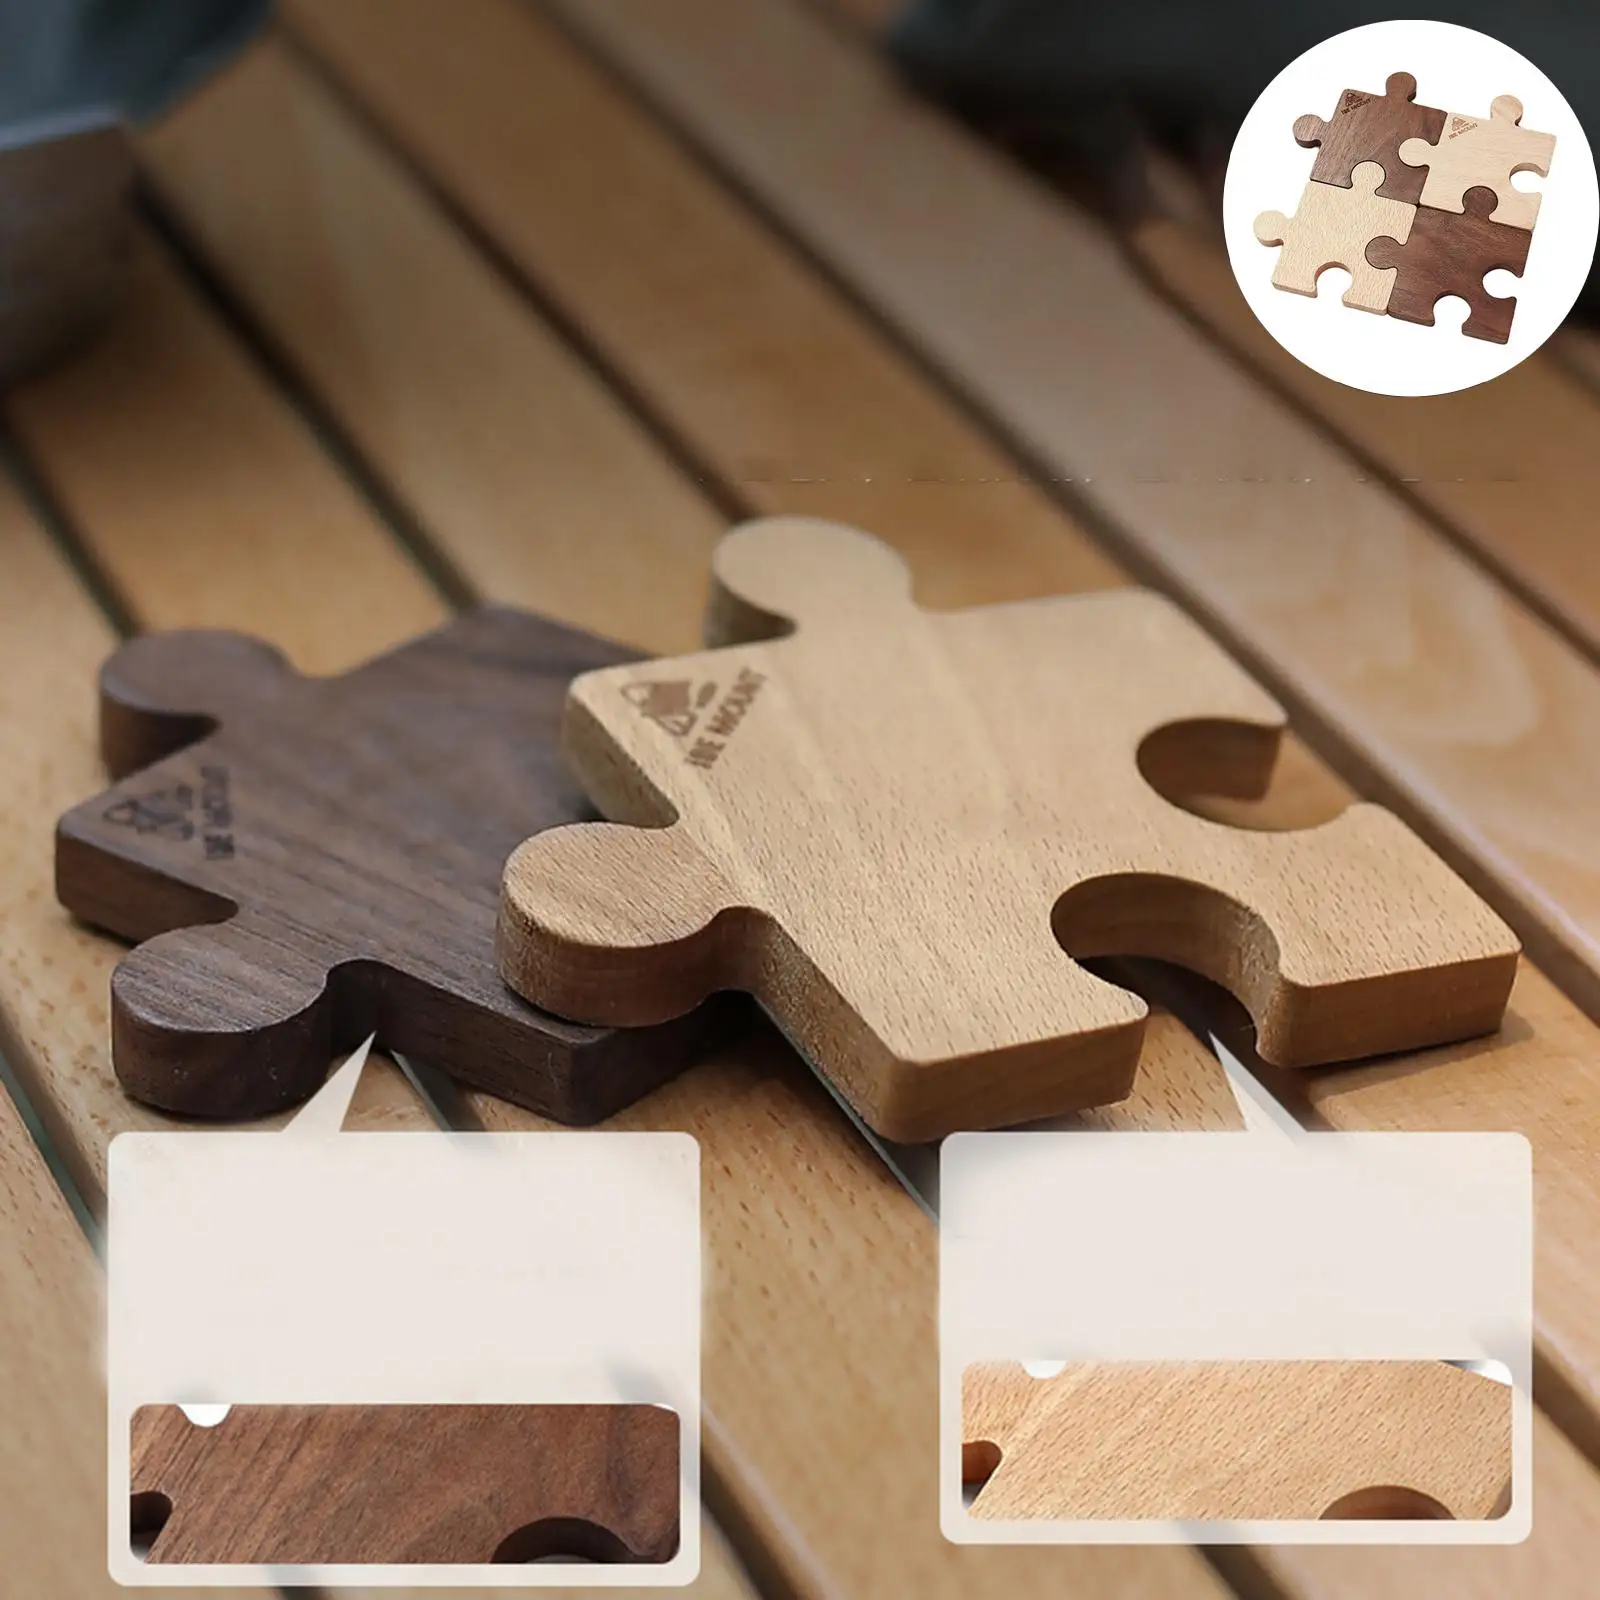 4x Wooden Coasters Jigsaw Puzzle Design Ornament Creative Coffee Mug Pad for Home